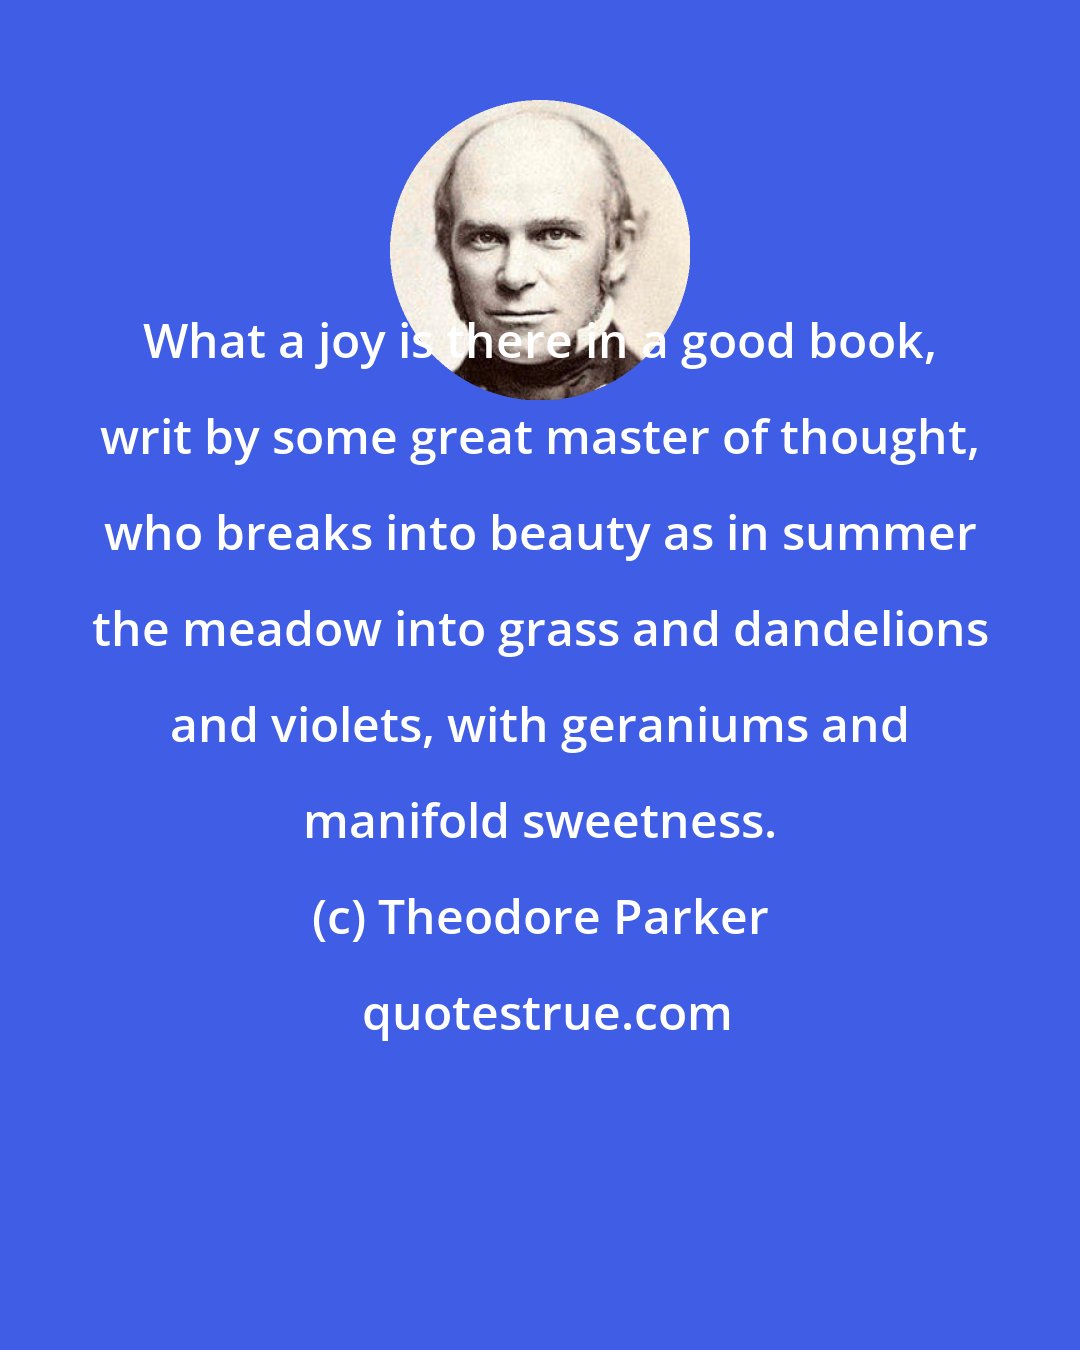 Theodore Parker: What a joy is there in a good book, writ by some great master of thought, who breaks into beauty as in summer the meadow into grass and dandelions and violets, with geraniums and manifold sweetness.